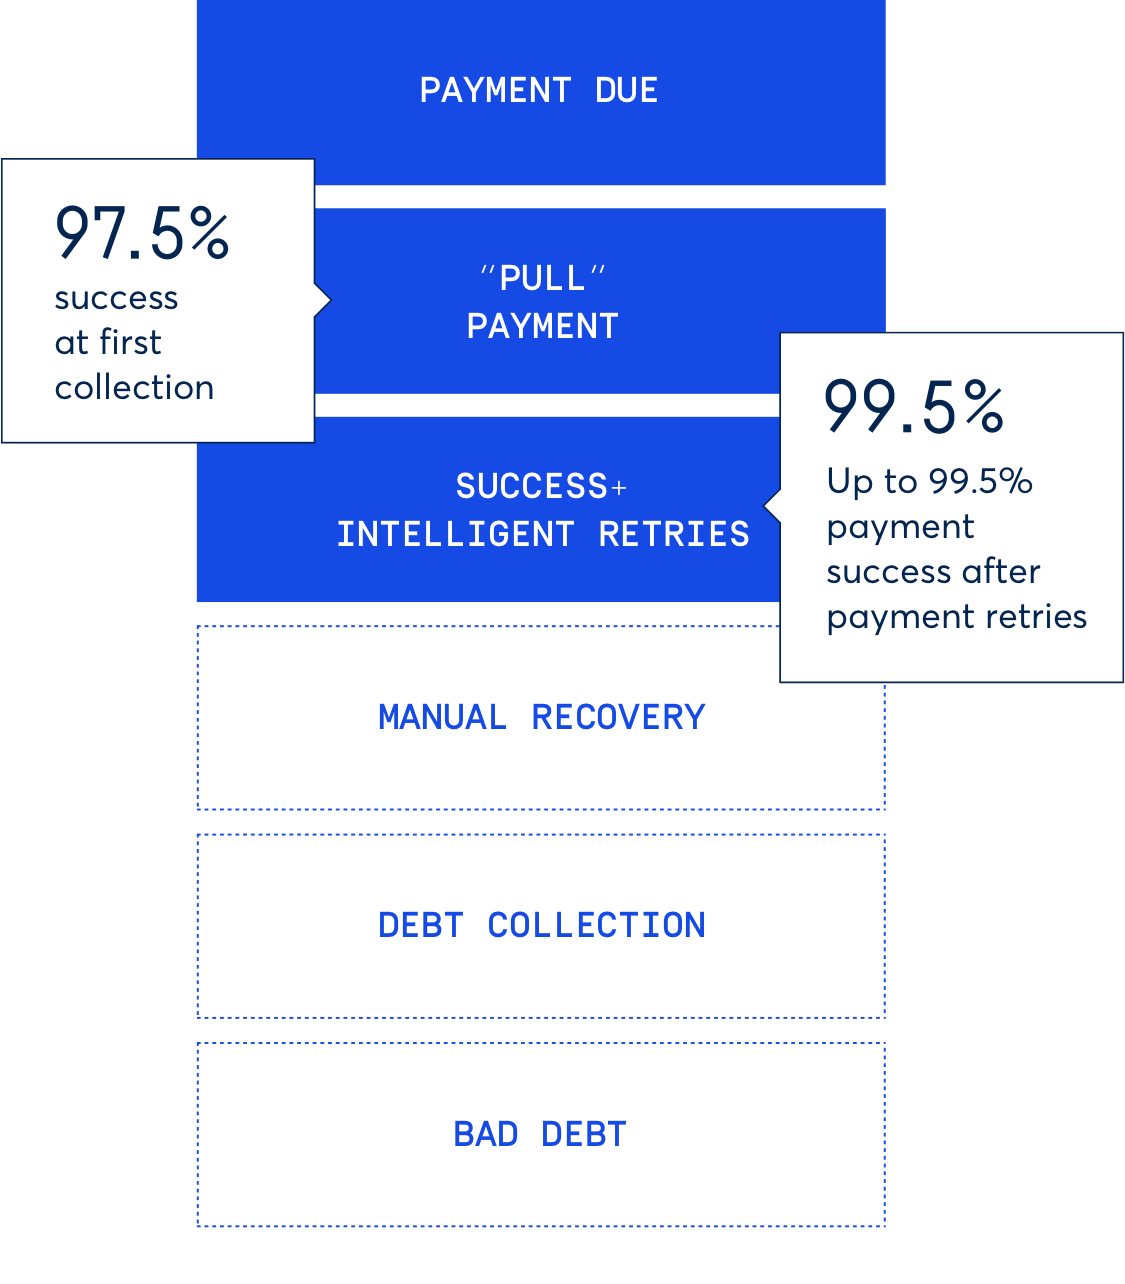 Improve your payment success with GoCardless